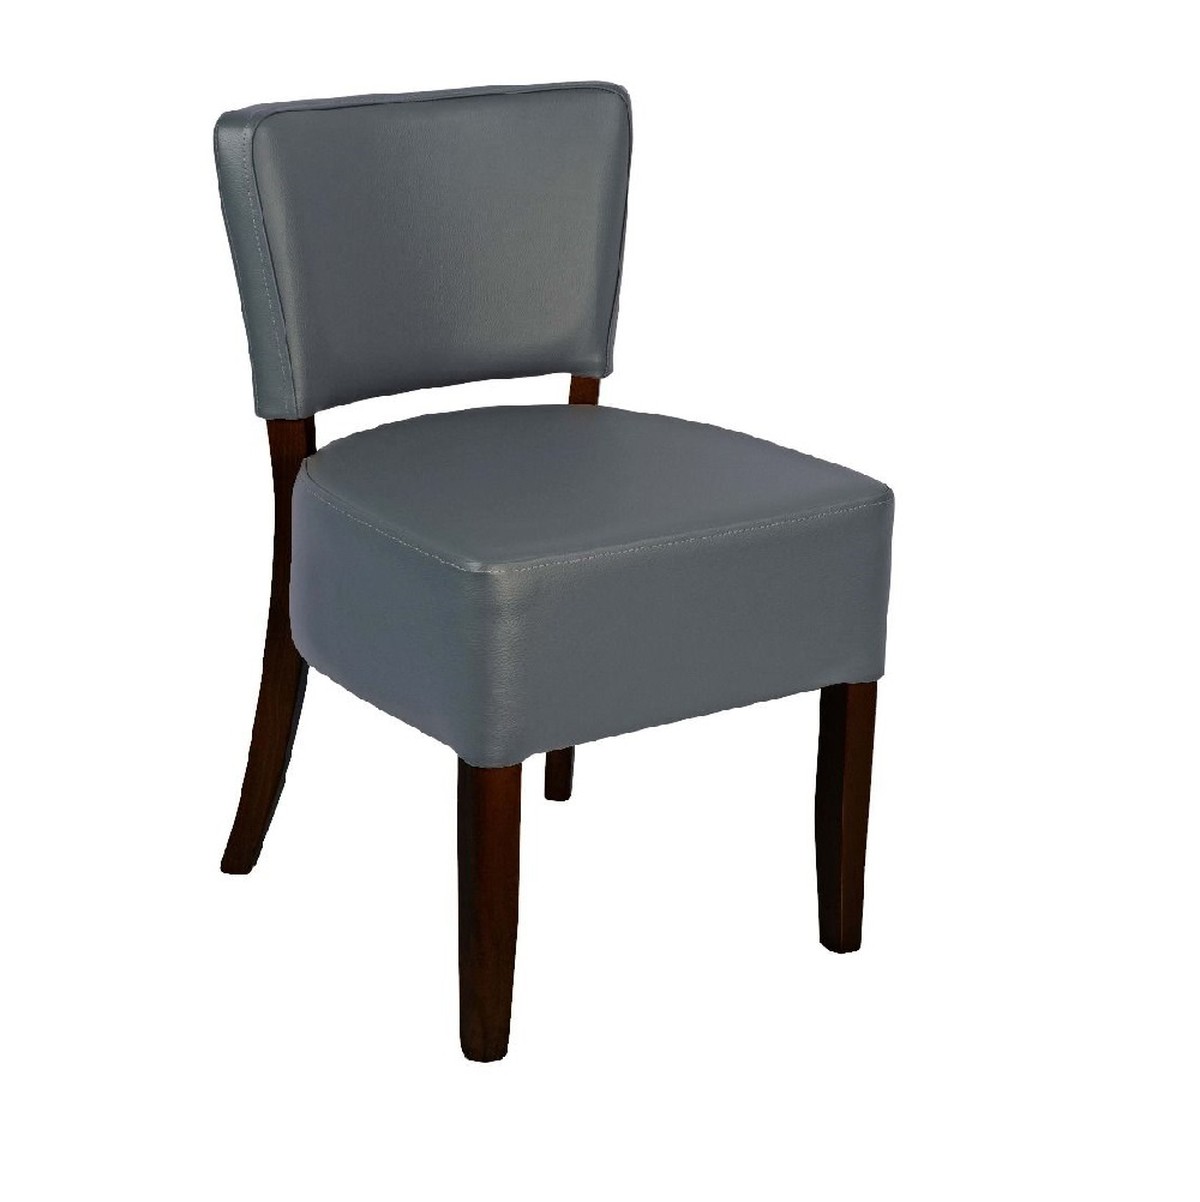 Secondhand Chairs and Tables | Restaurant Chairs | NEW: Model 1970 ...